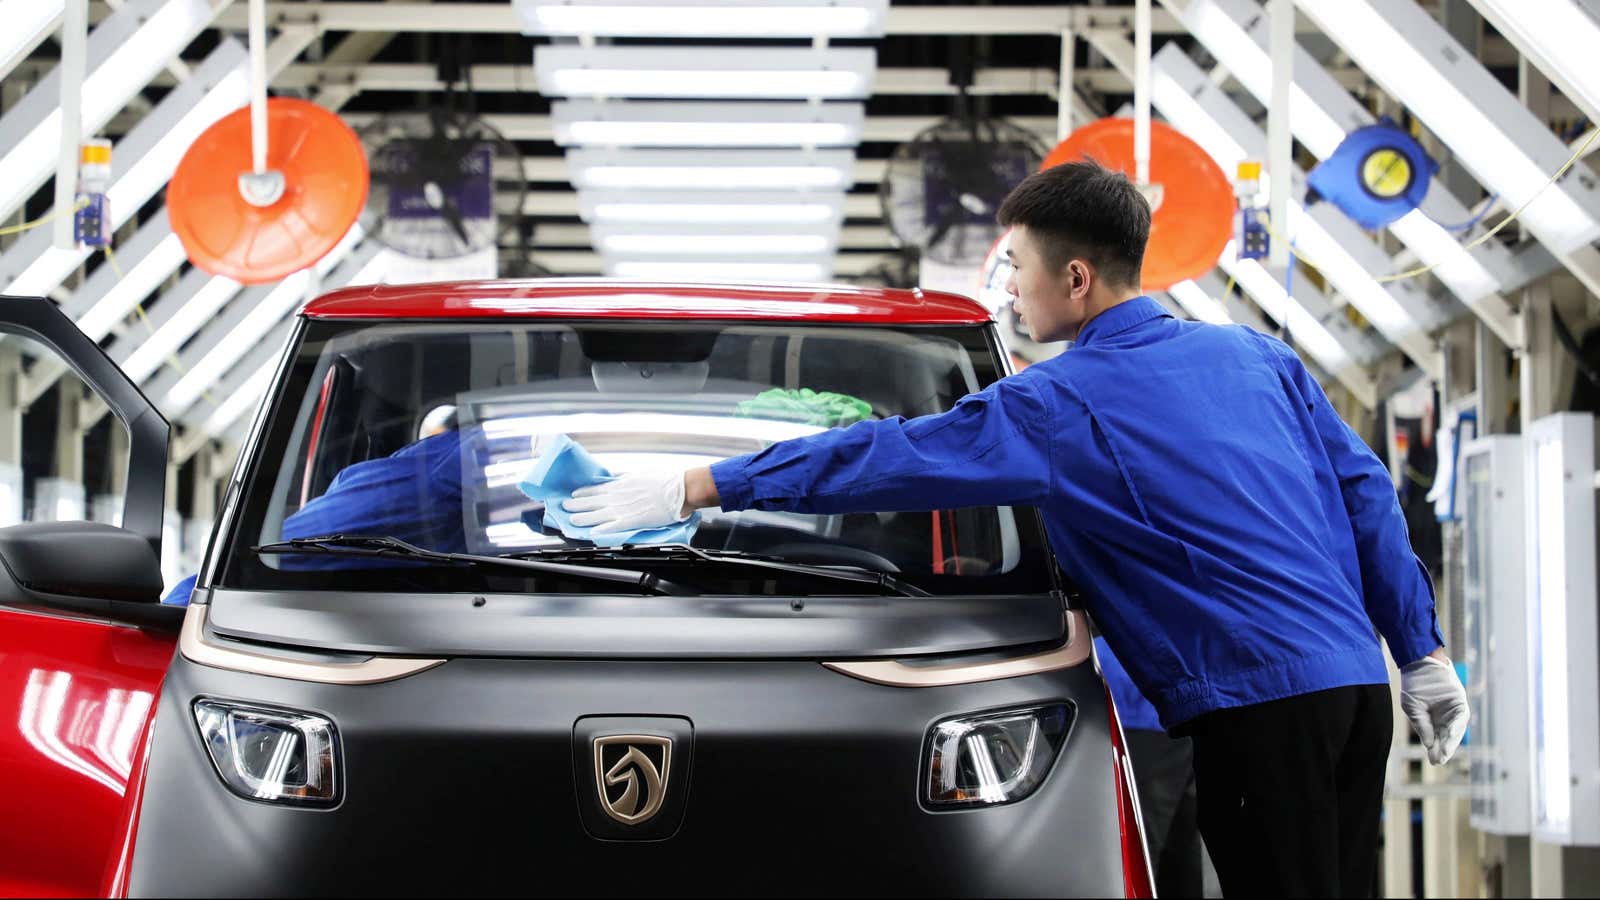 Workers are seen at the assembly line of Baojun E200 electric vehicles (EV) at a plant of SAIC-GM-Wuling, a joint venture among SAIC Motor, General Motors and Liuzhou Wuling Motors Co Ltd, in Qingdao, Shandong province China September 28, 2018.